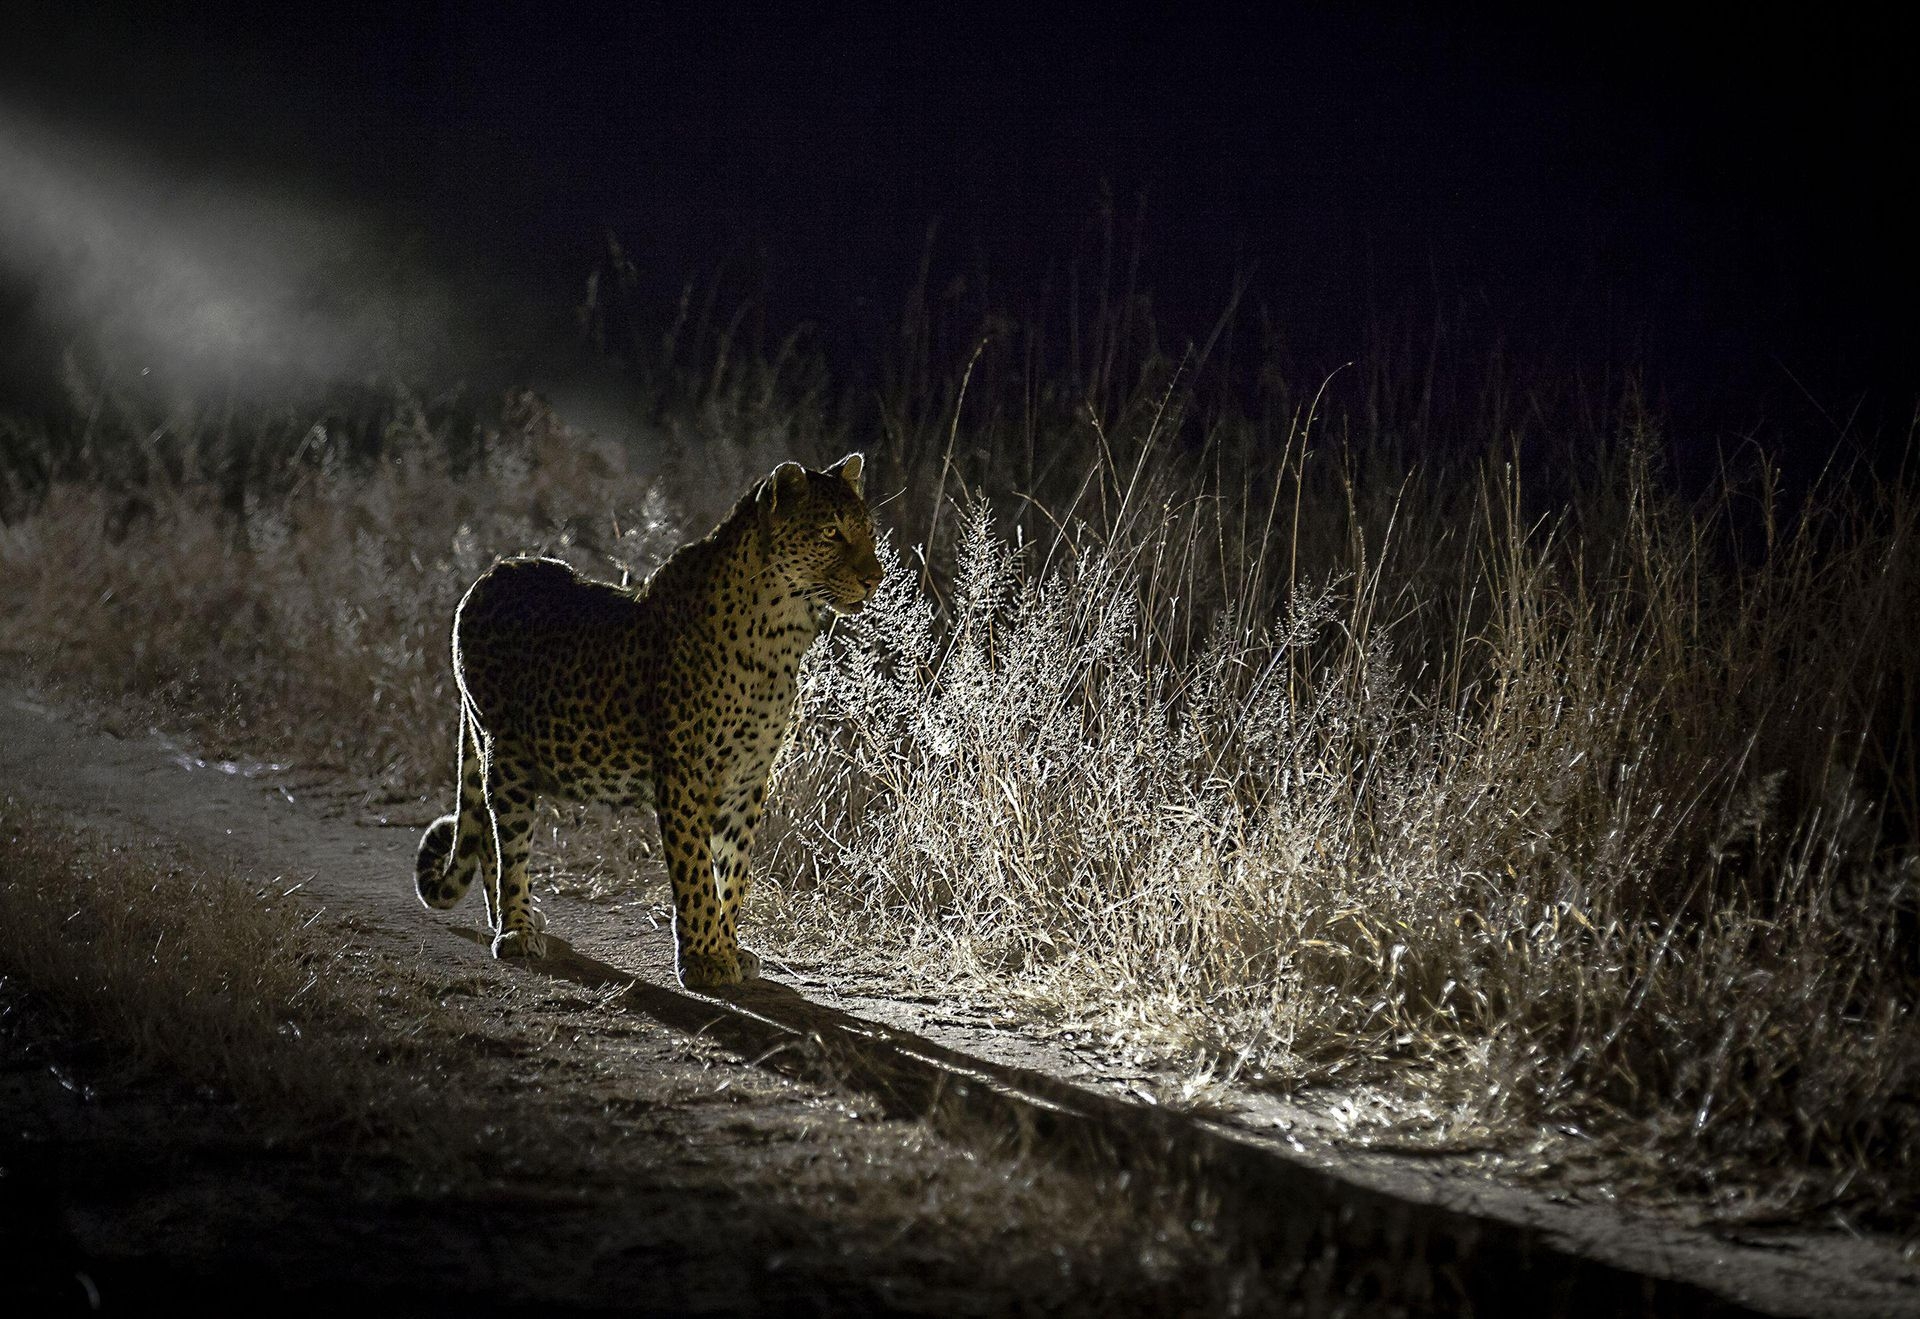 Photograph by Bob Davies, National Geographic